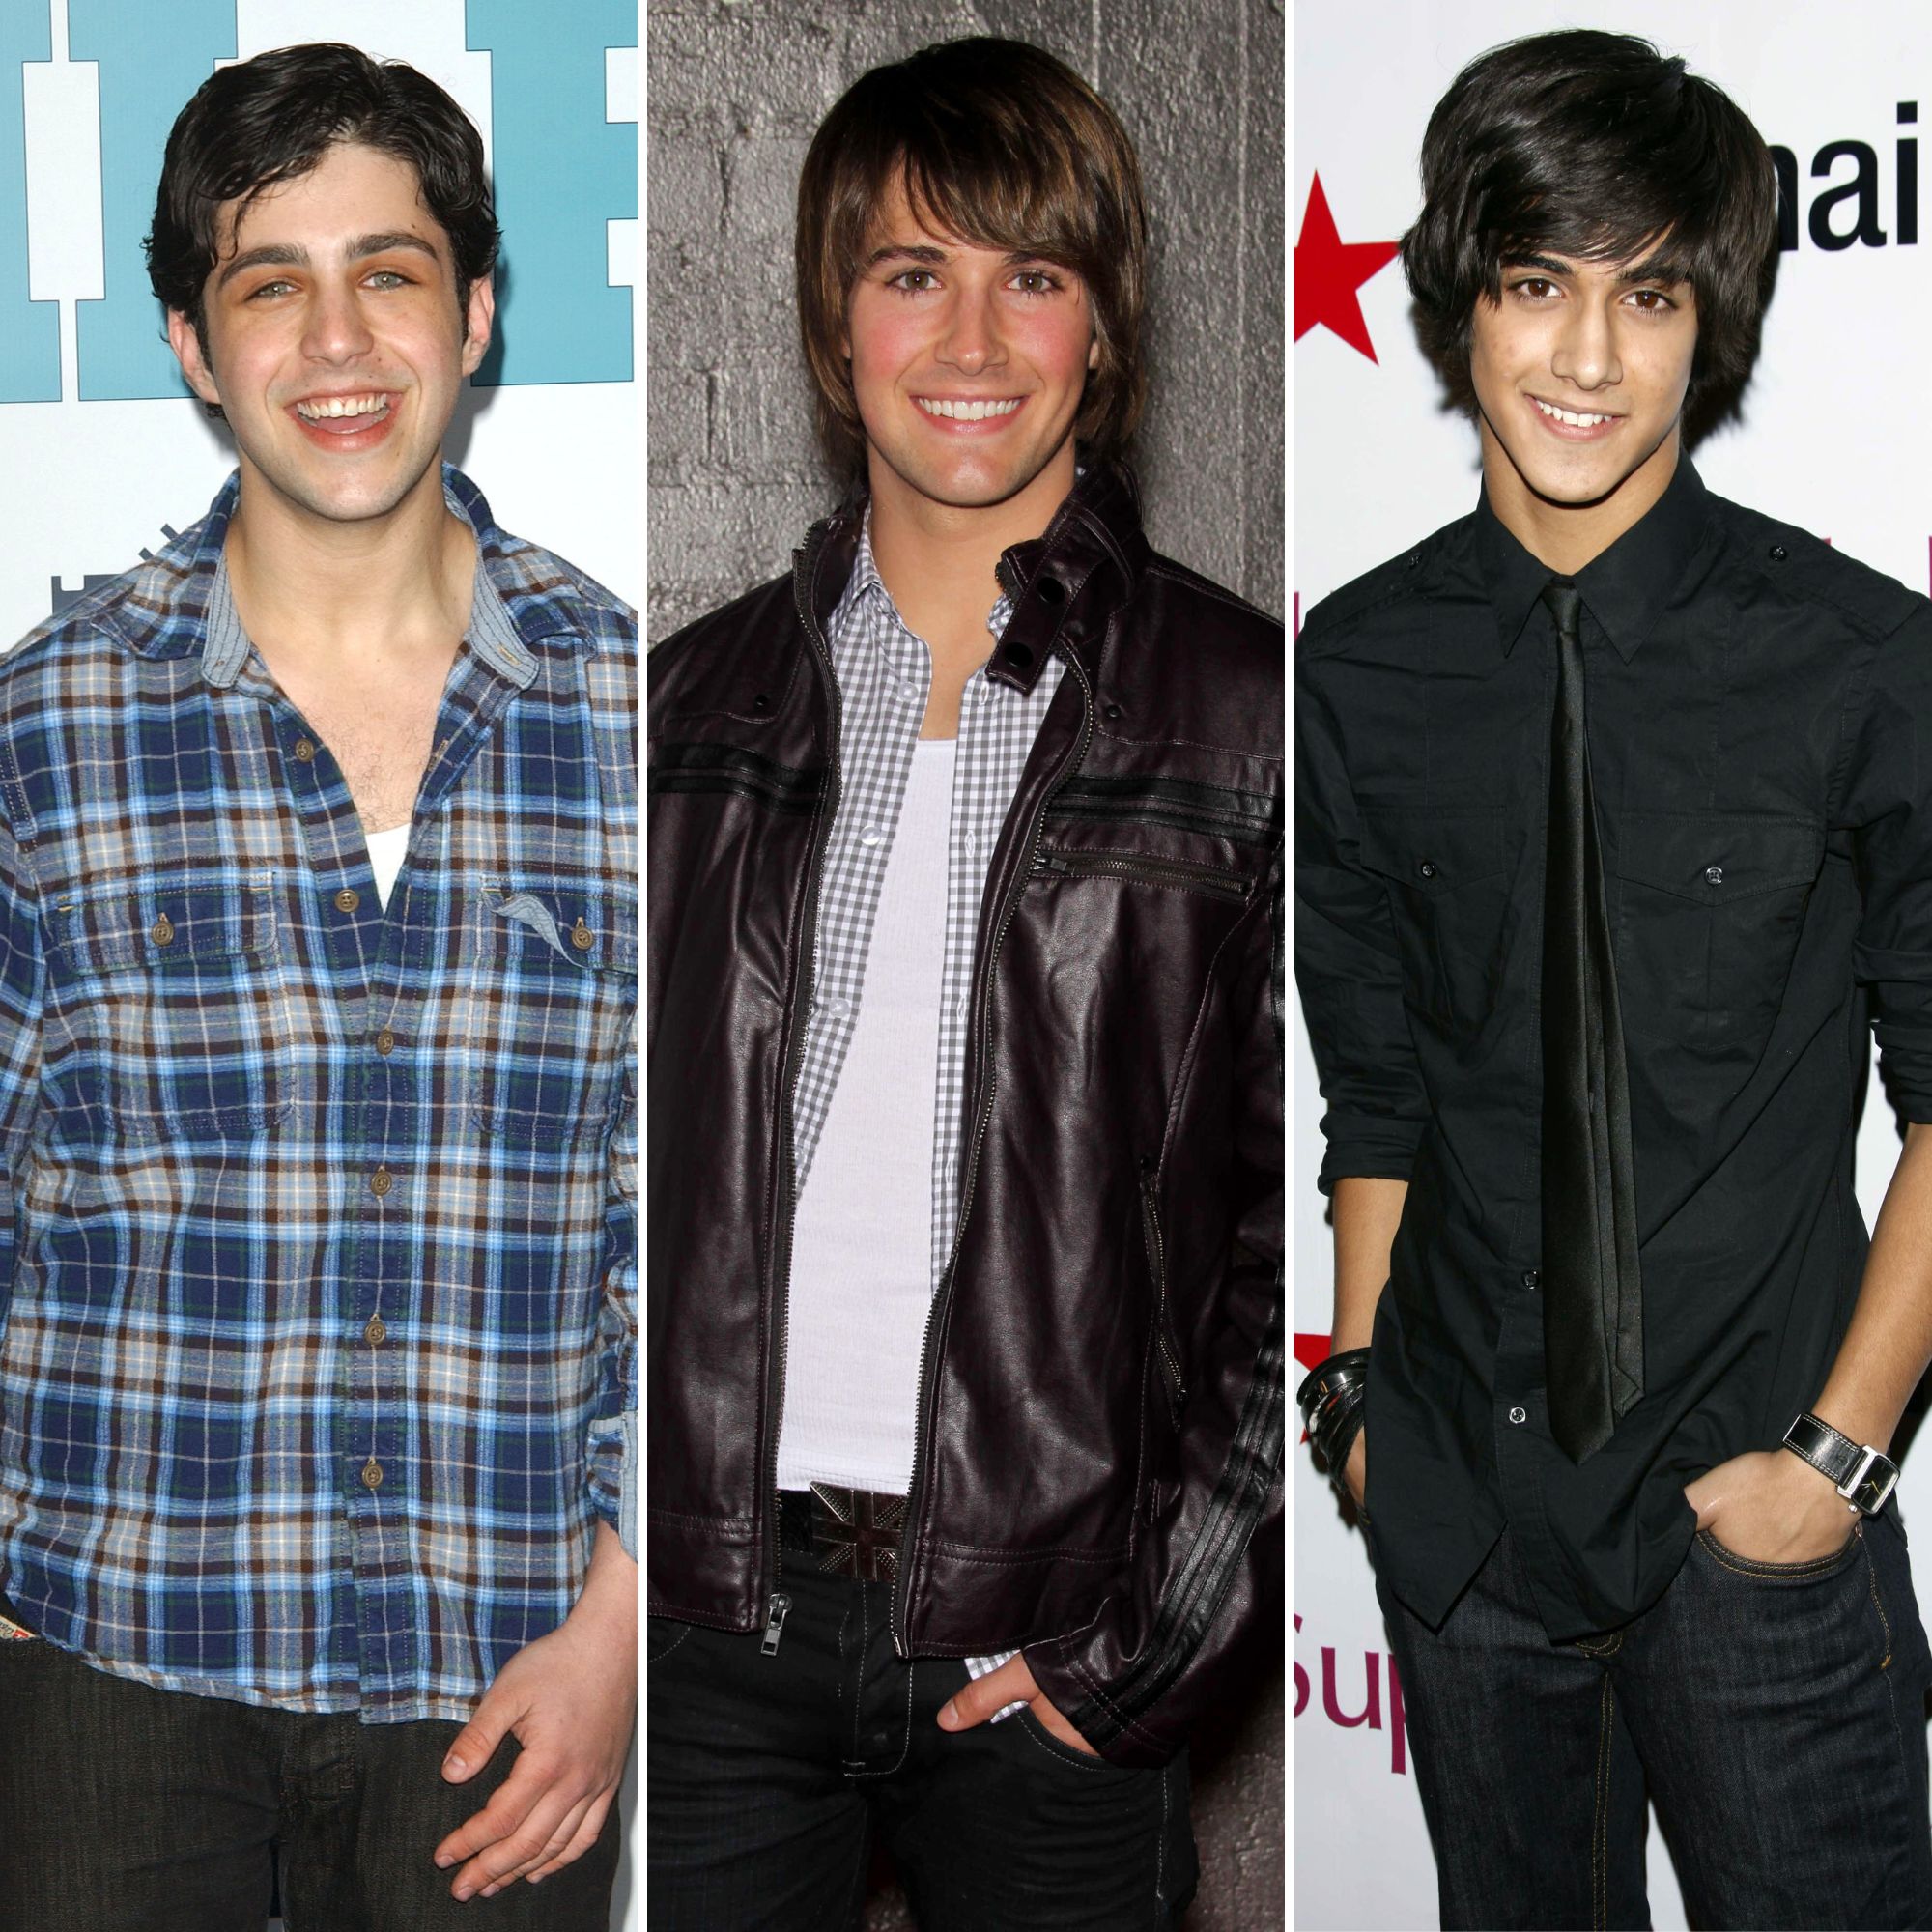 One Direction Big Time Rush Porn - Nickelodeon Guys Who Look Different: Then-and-Now Photos